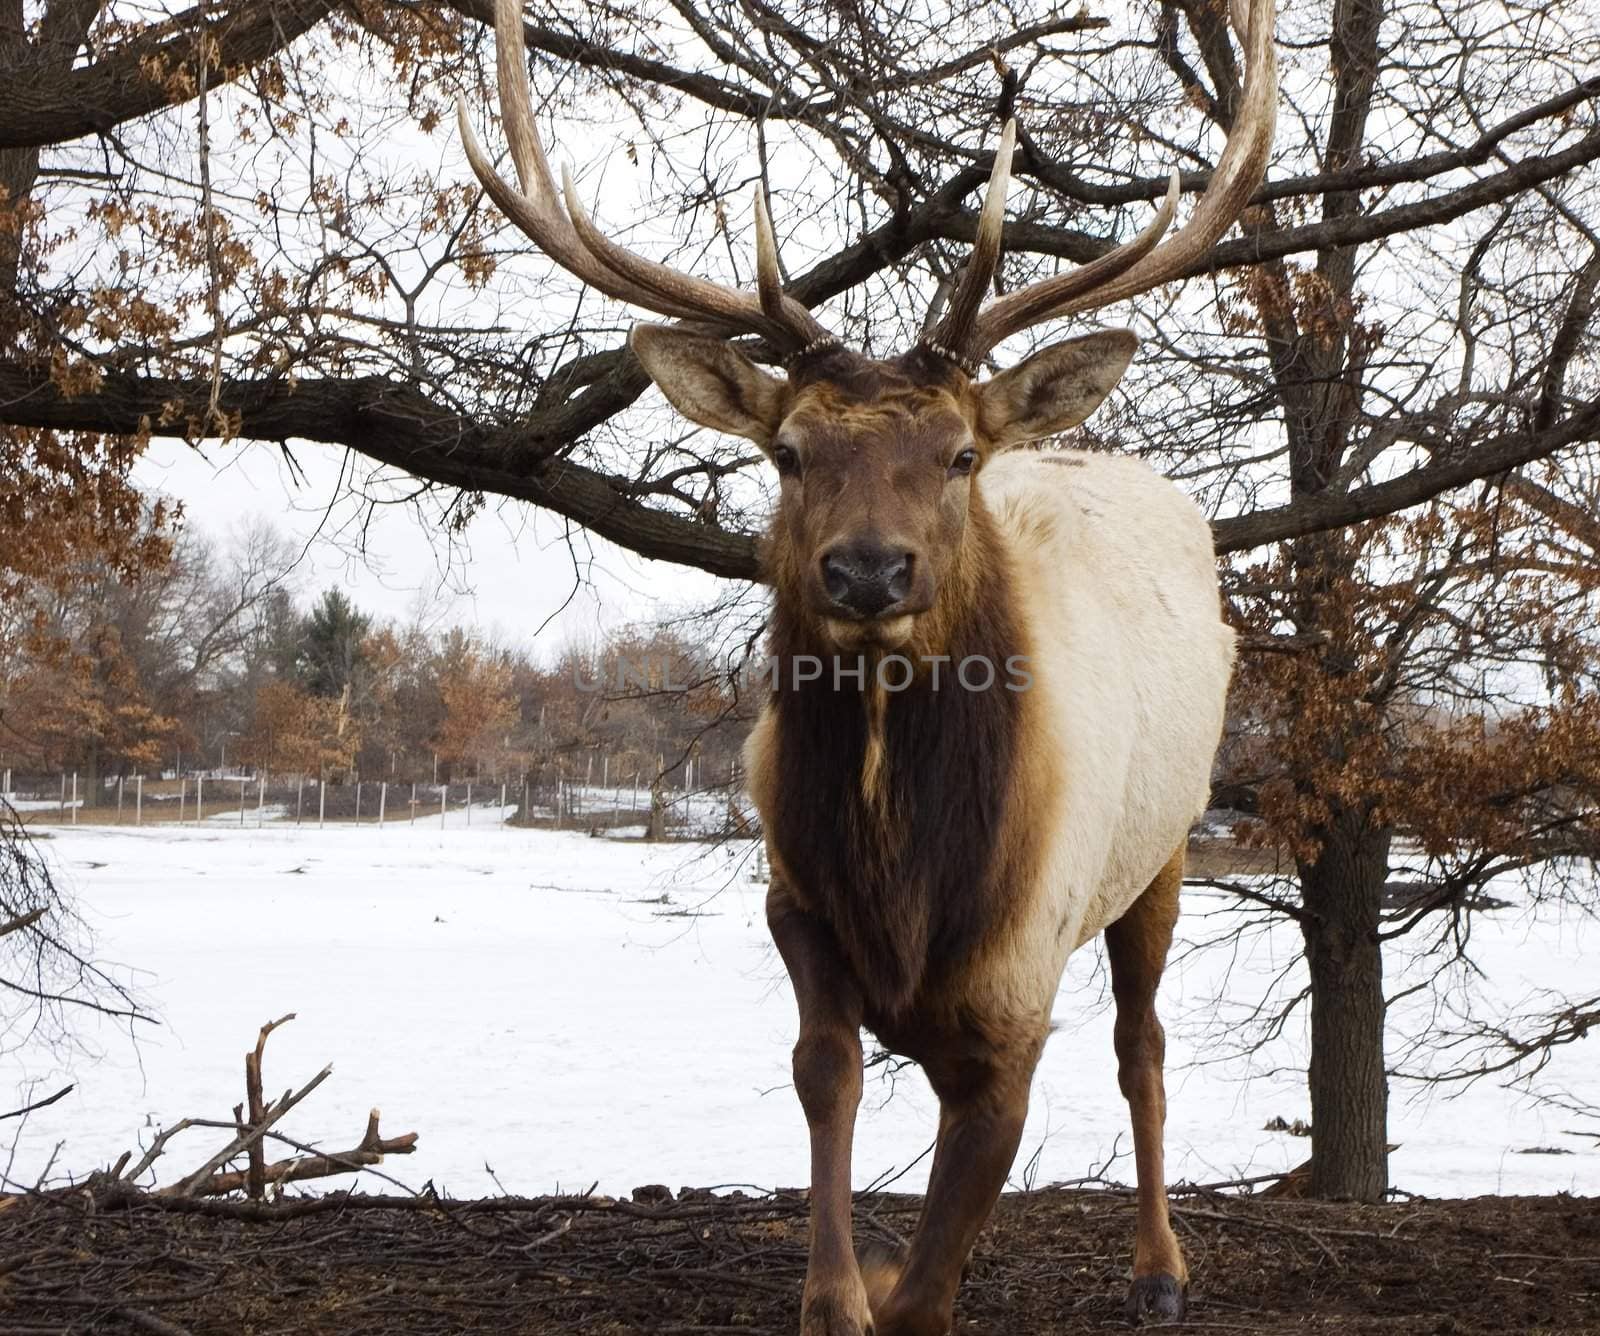 Rushing Elk by bhathaway